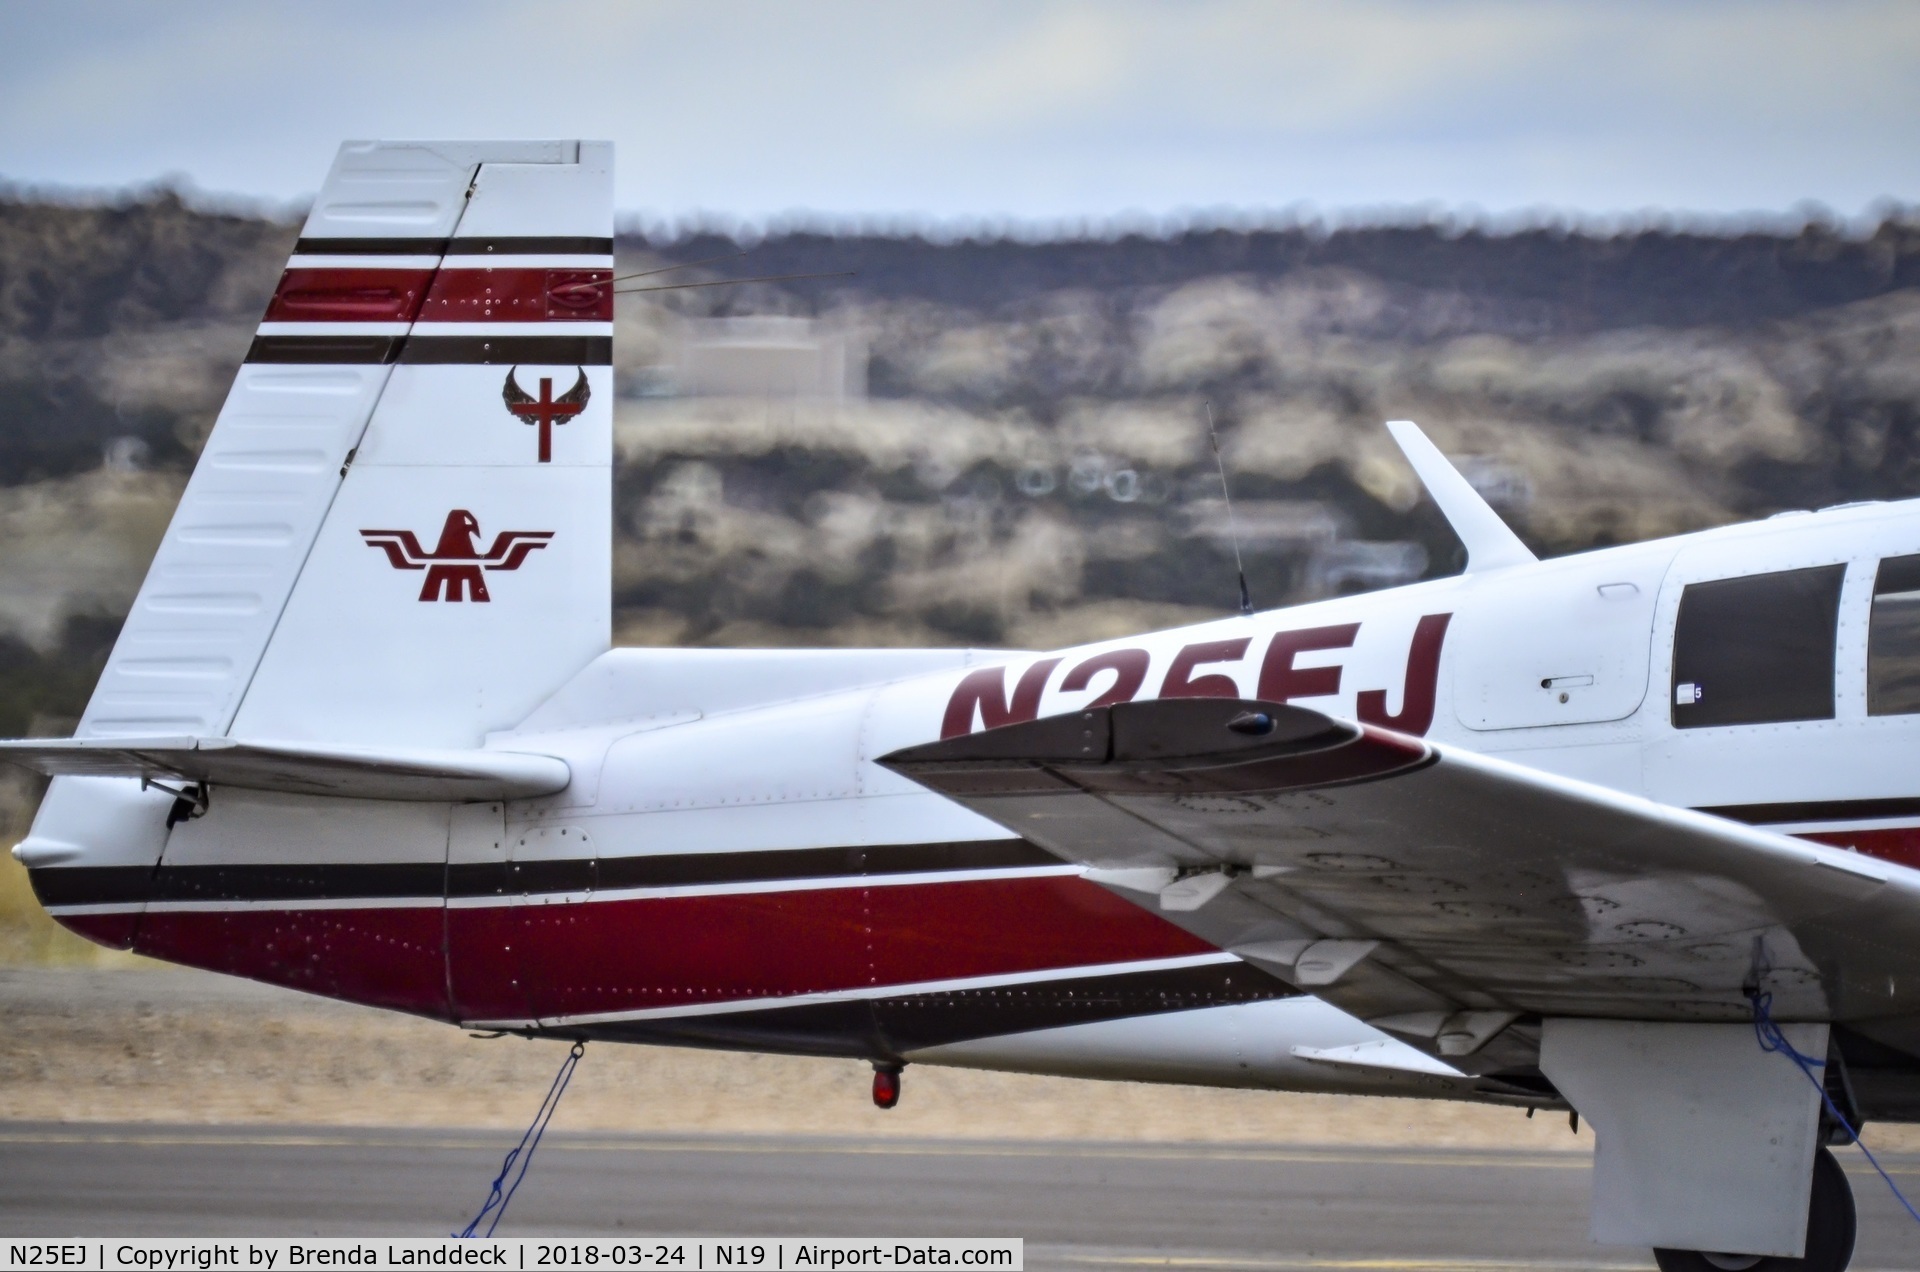 N25EJ, 1974 Mooney M20F Executive C/N 22-0076, Parked at the Aztec New Mexico Airport.